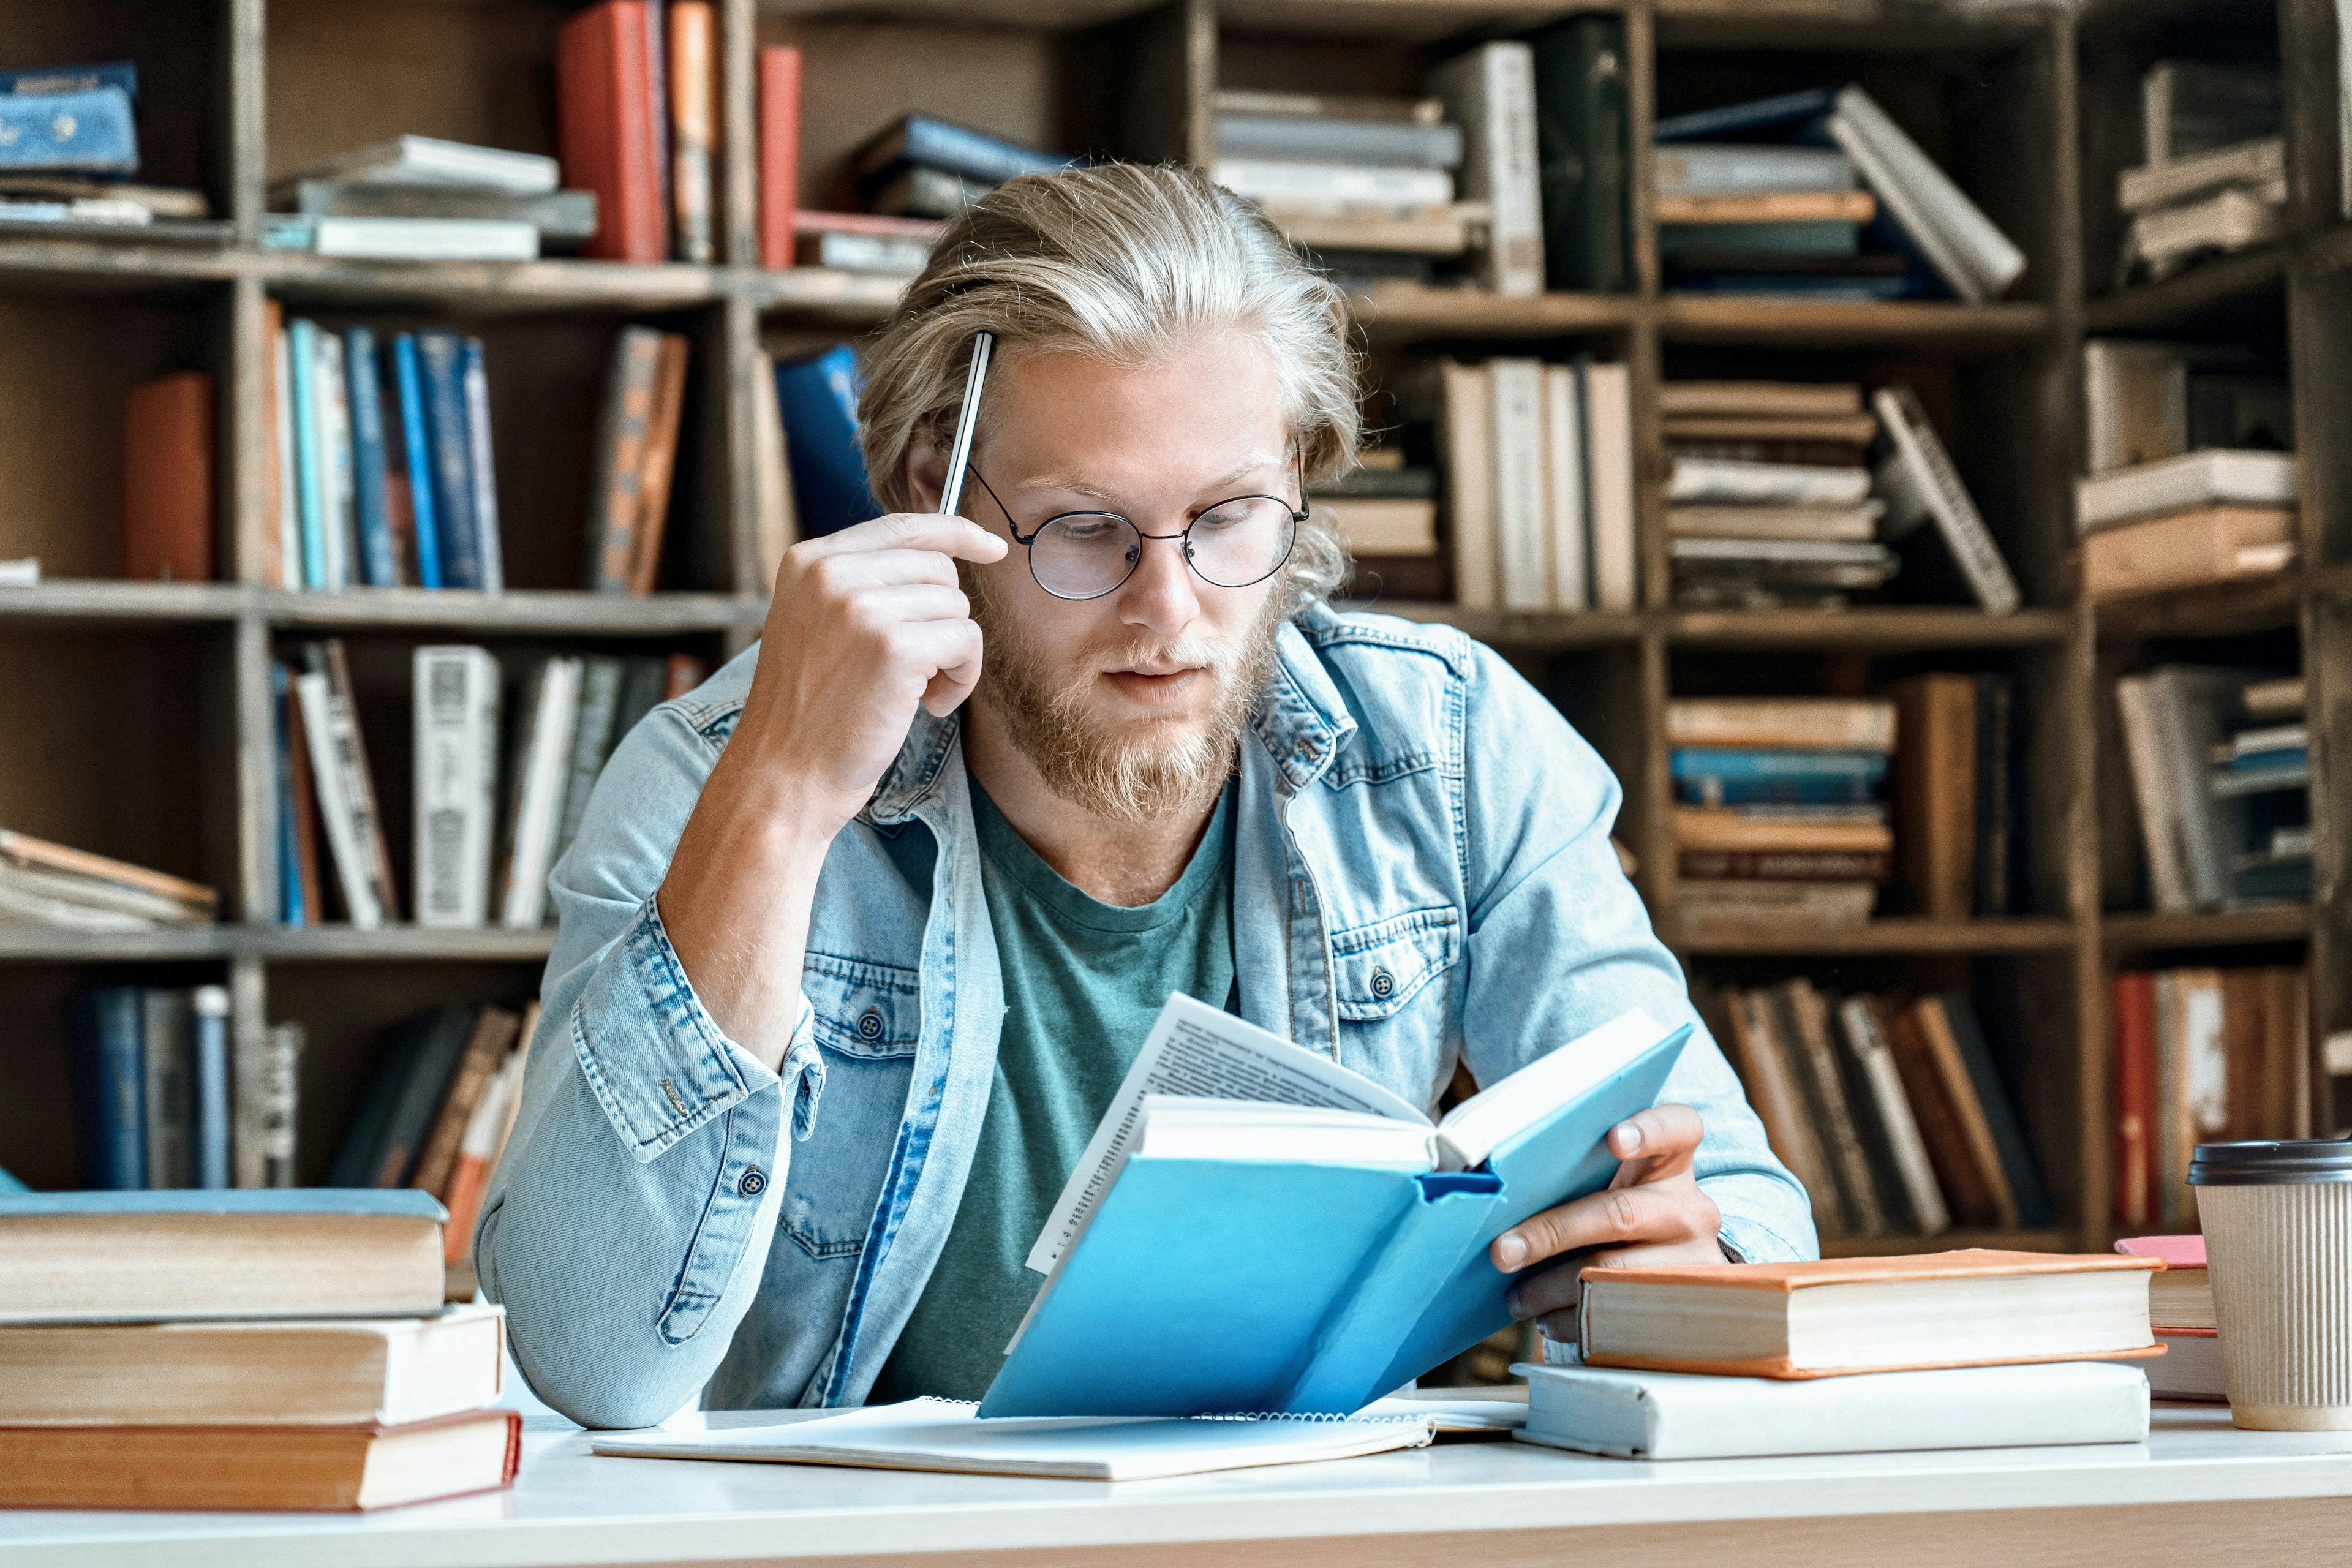 Blond man with round glasses holding a pencil against his forehead while intently reading a book.